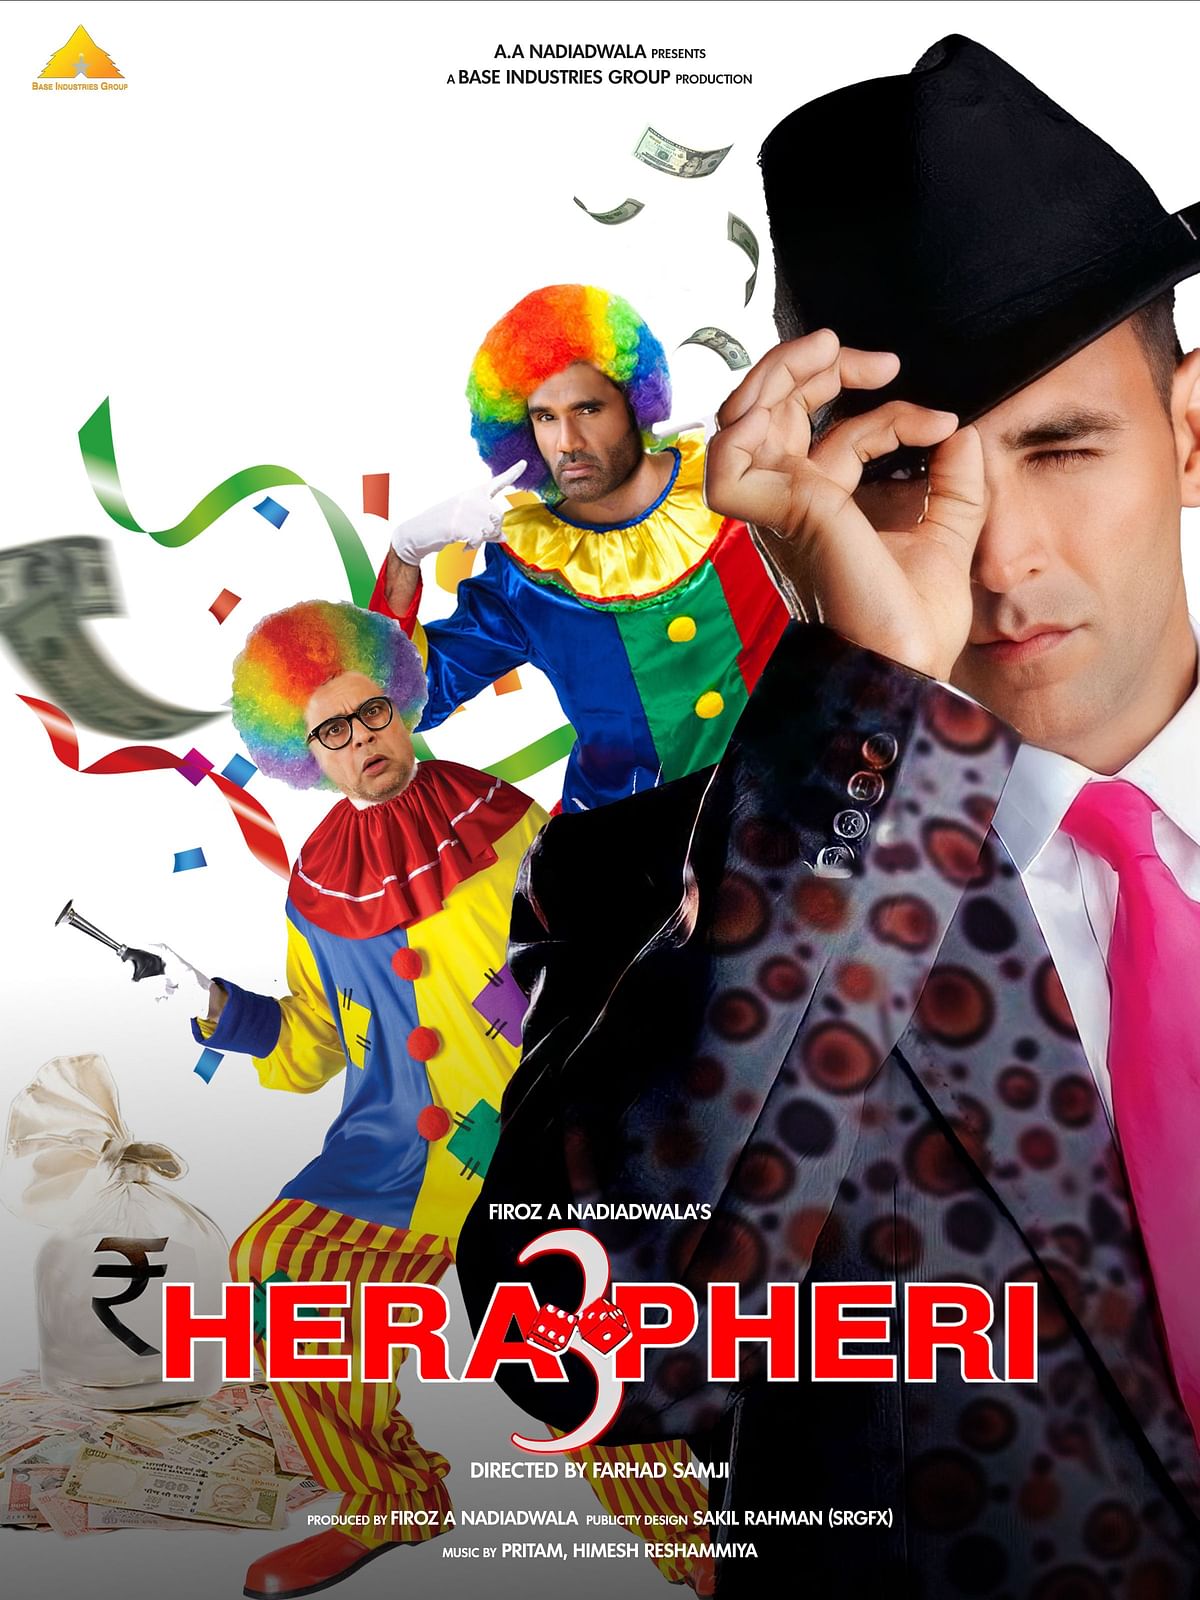 The highly anticipated third installment of the beloved Hera Pheri franchise is one of the Hindi movies that everyone is excited to watch  on the big screen.